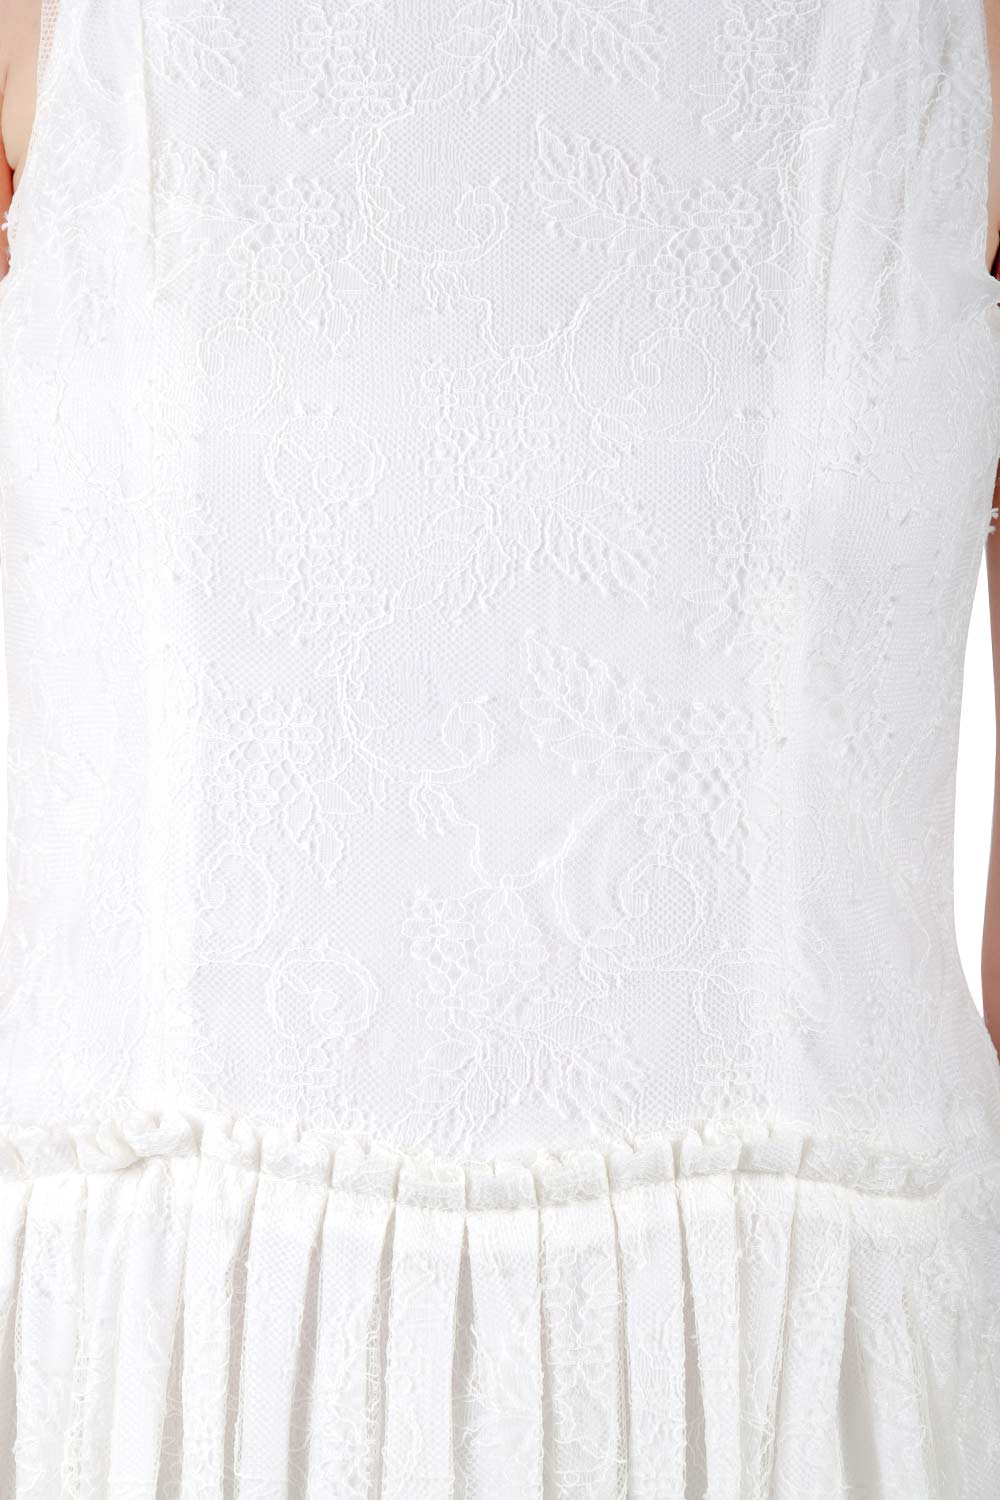 Pre-owned Theory Theyskens  White Lace Sleeveless Dinal Dress M